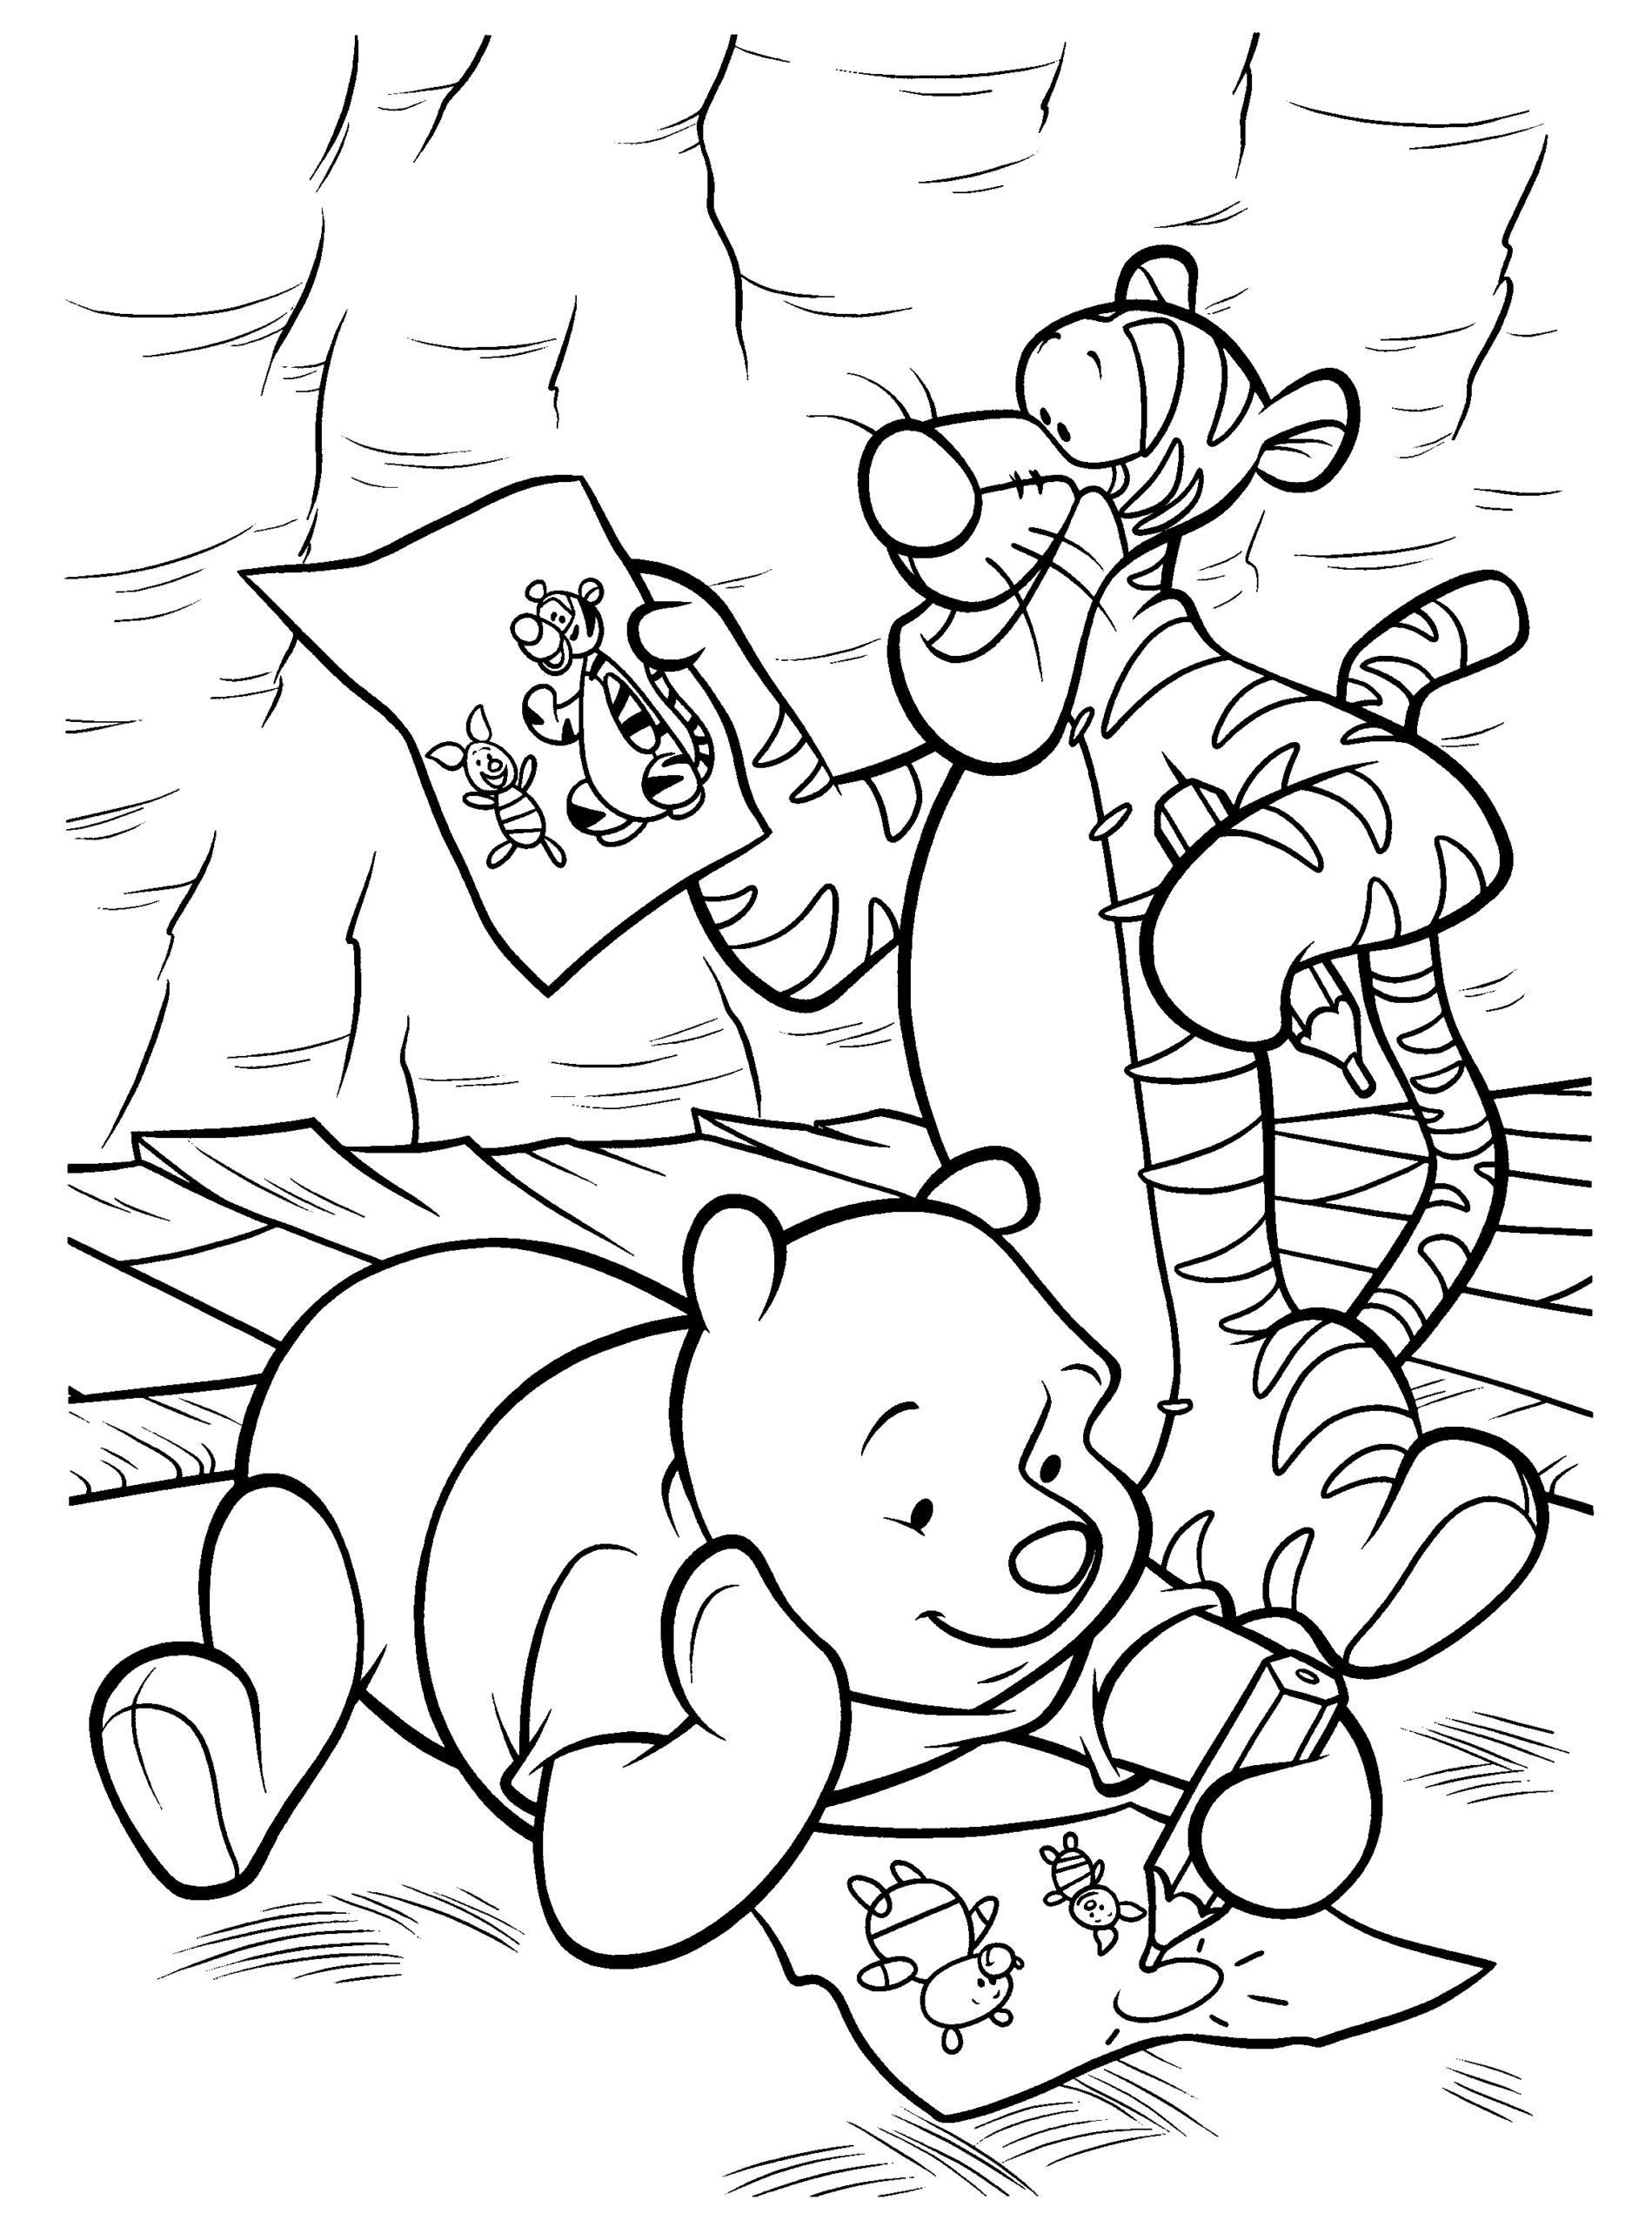 Winnie the Pooh Coloring Pages Cartoons winnie the pooh 13 Printable 2020 7104 Coloring4free